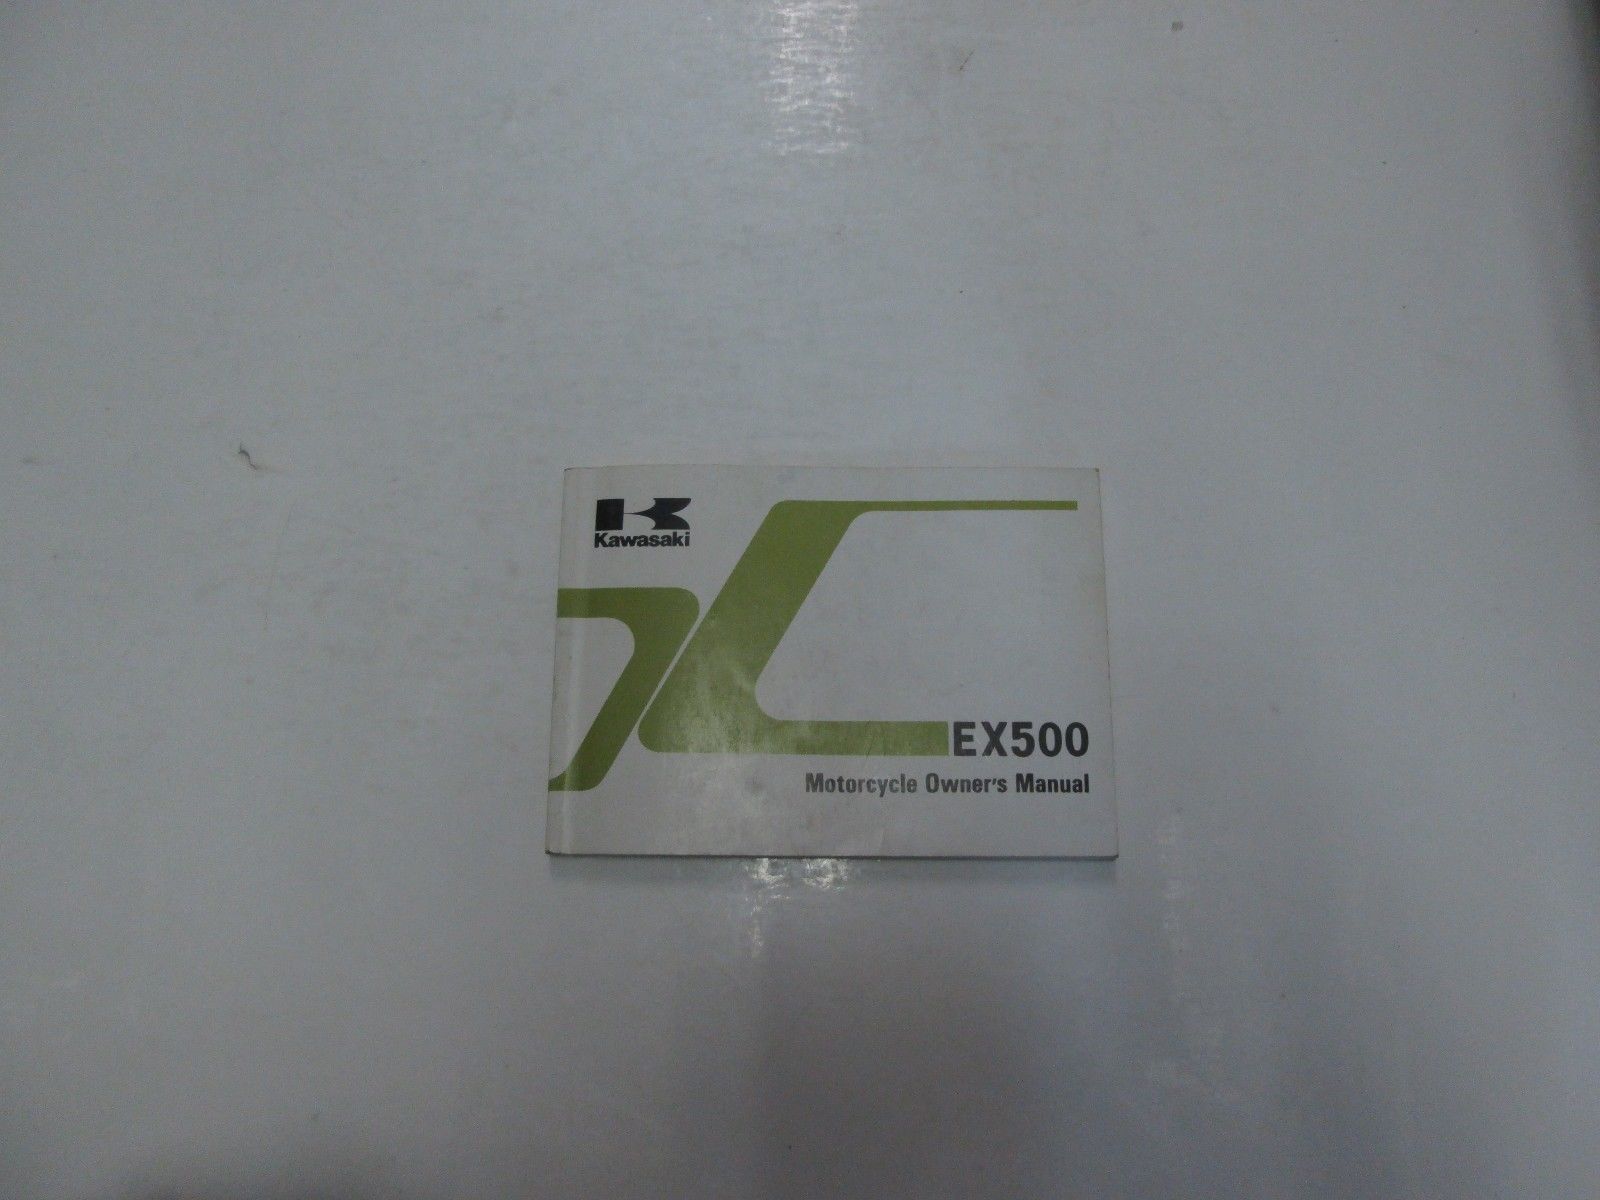 1992 Kawasaki EX500 Motorcycle Owners Manual WRITING STAINS WEAR FACTORY OEM - $25.02